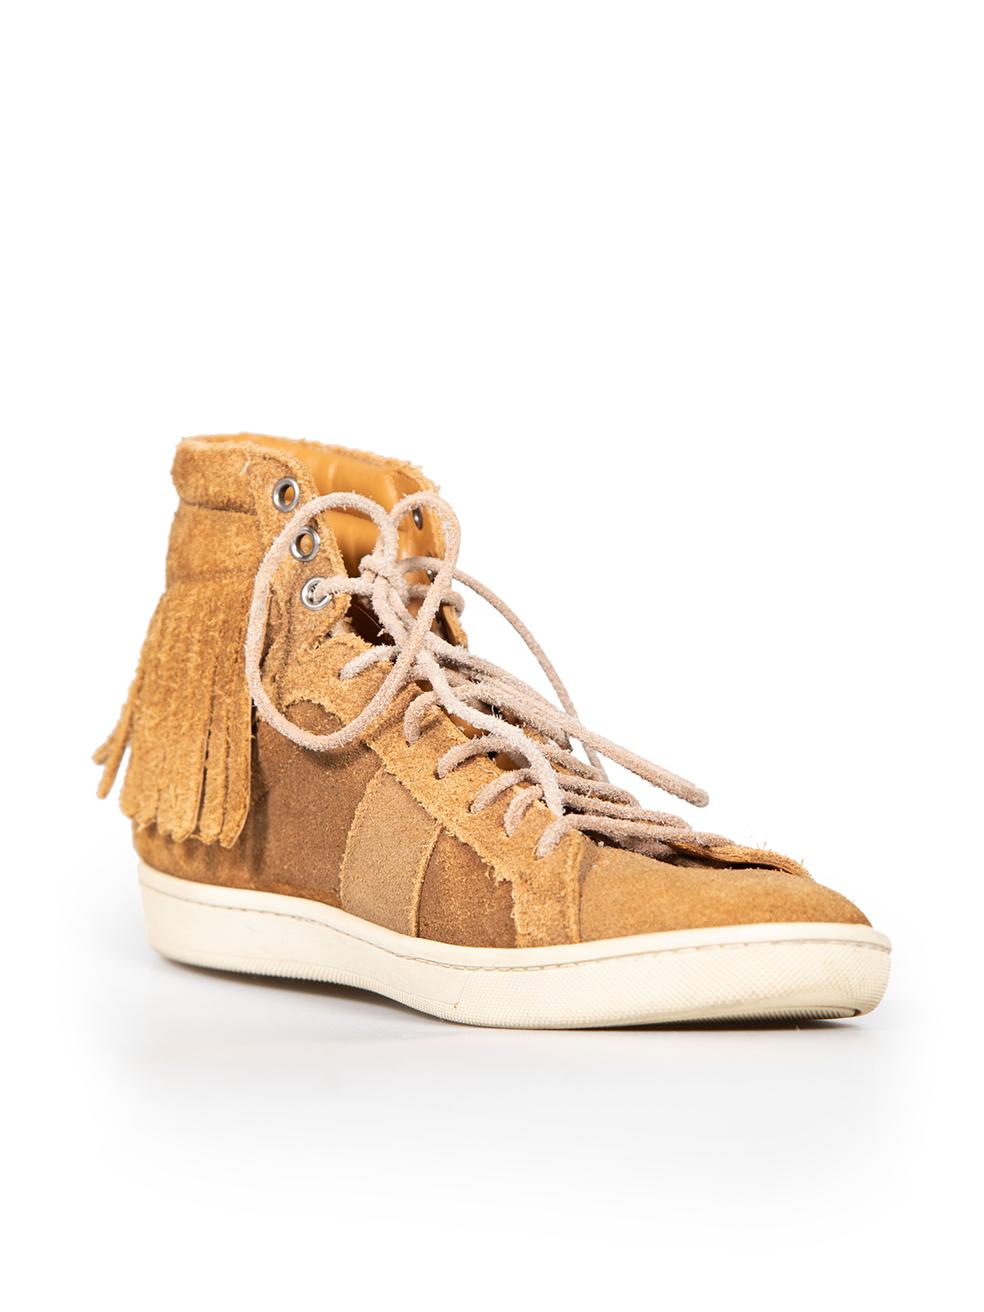 CONDITION is Very good. Minimal wear to shoes is evident. Minimal wear to the outsoles of both shoes with marks to the rubber on this used Saint Laurent designer resale item.
 
 
 
 Details
 
 
 Brown
 
 Suede
 
 Trainers
 
 High top
 
 Fringed